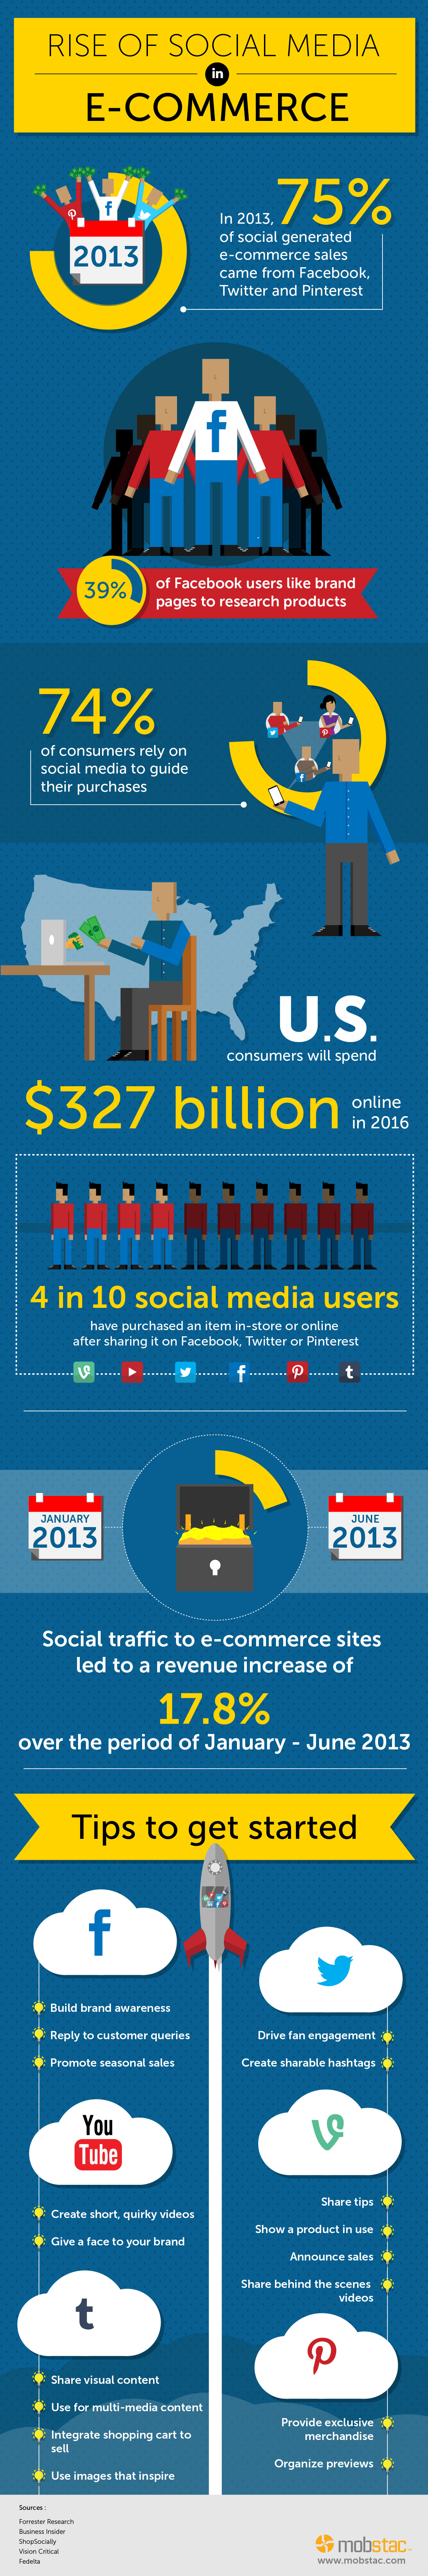 Rise of Social Media in Ecommerce